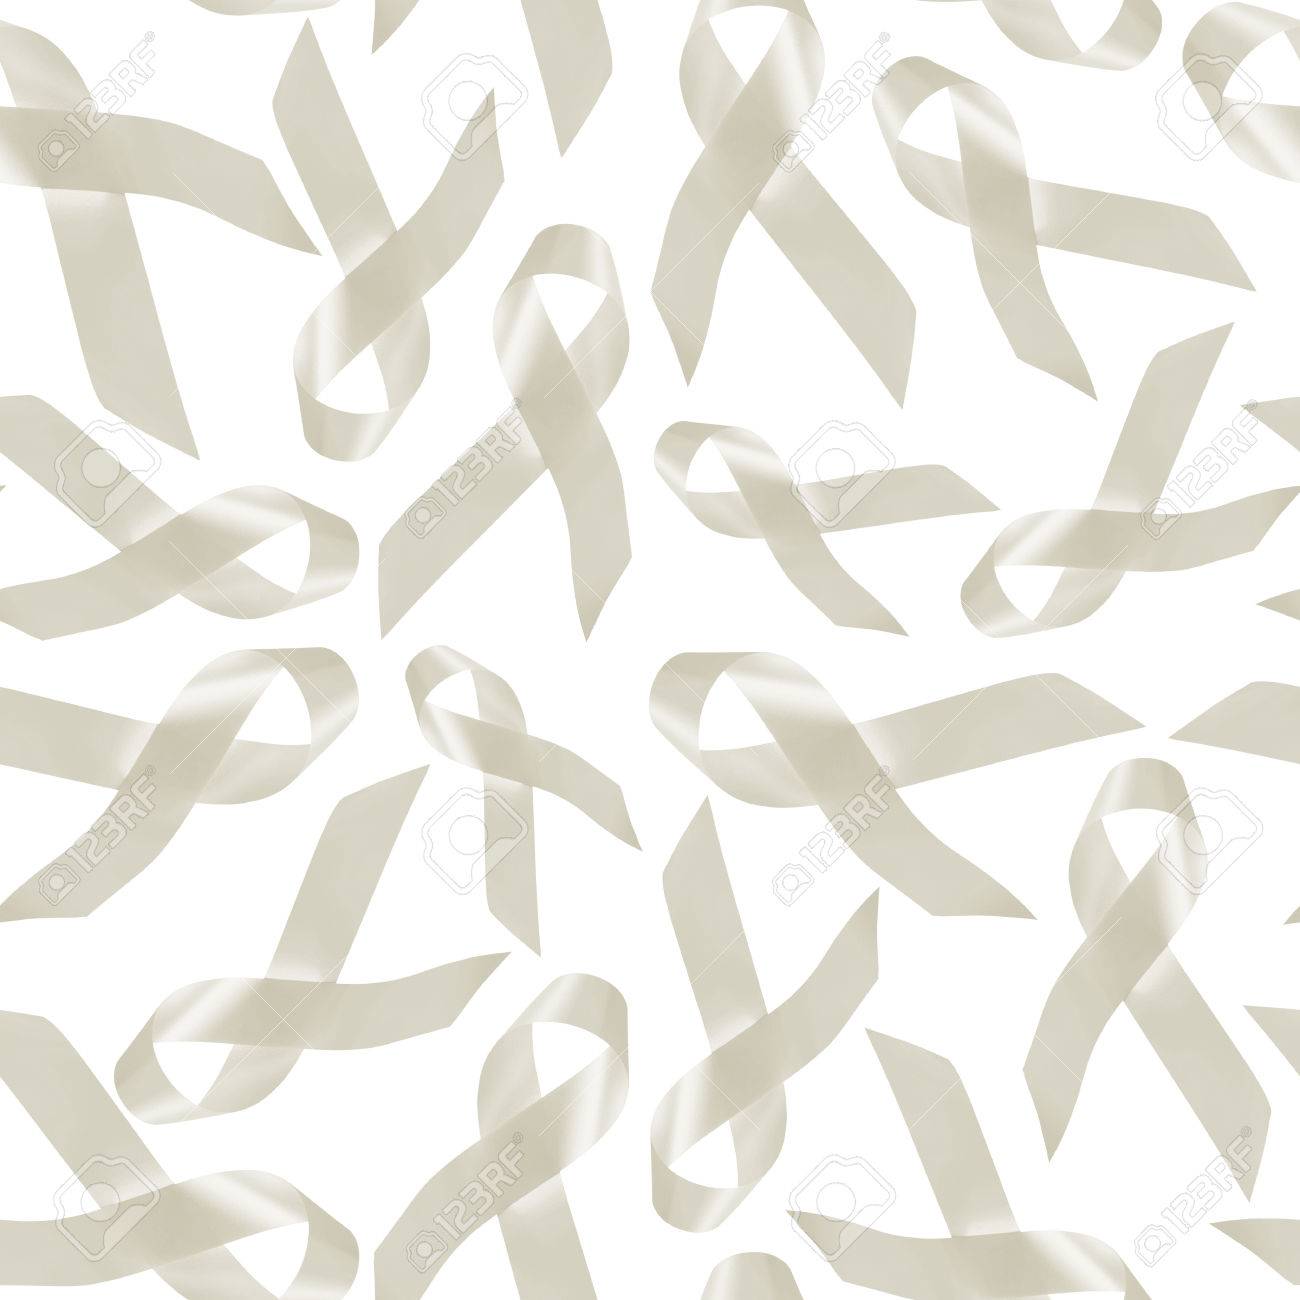 Lung Cancer Awareness Background Seamless Pattern Made Of White